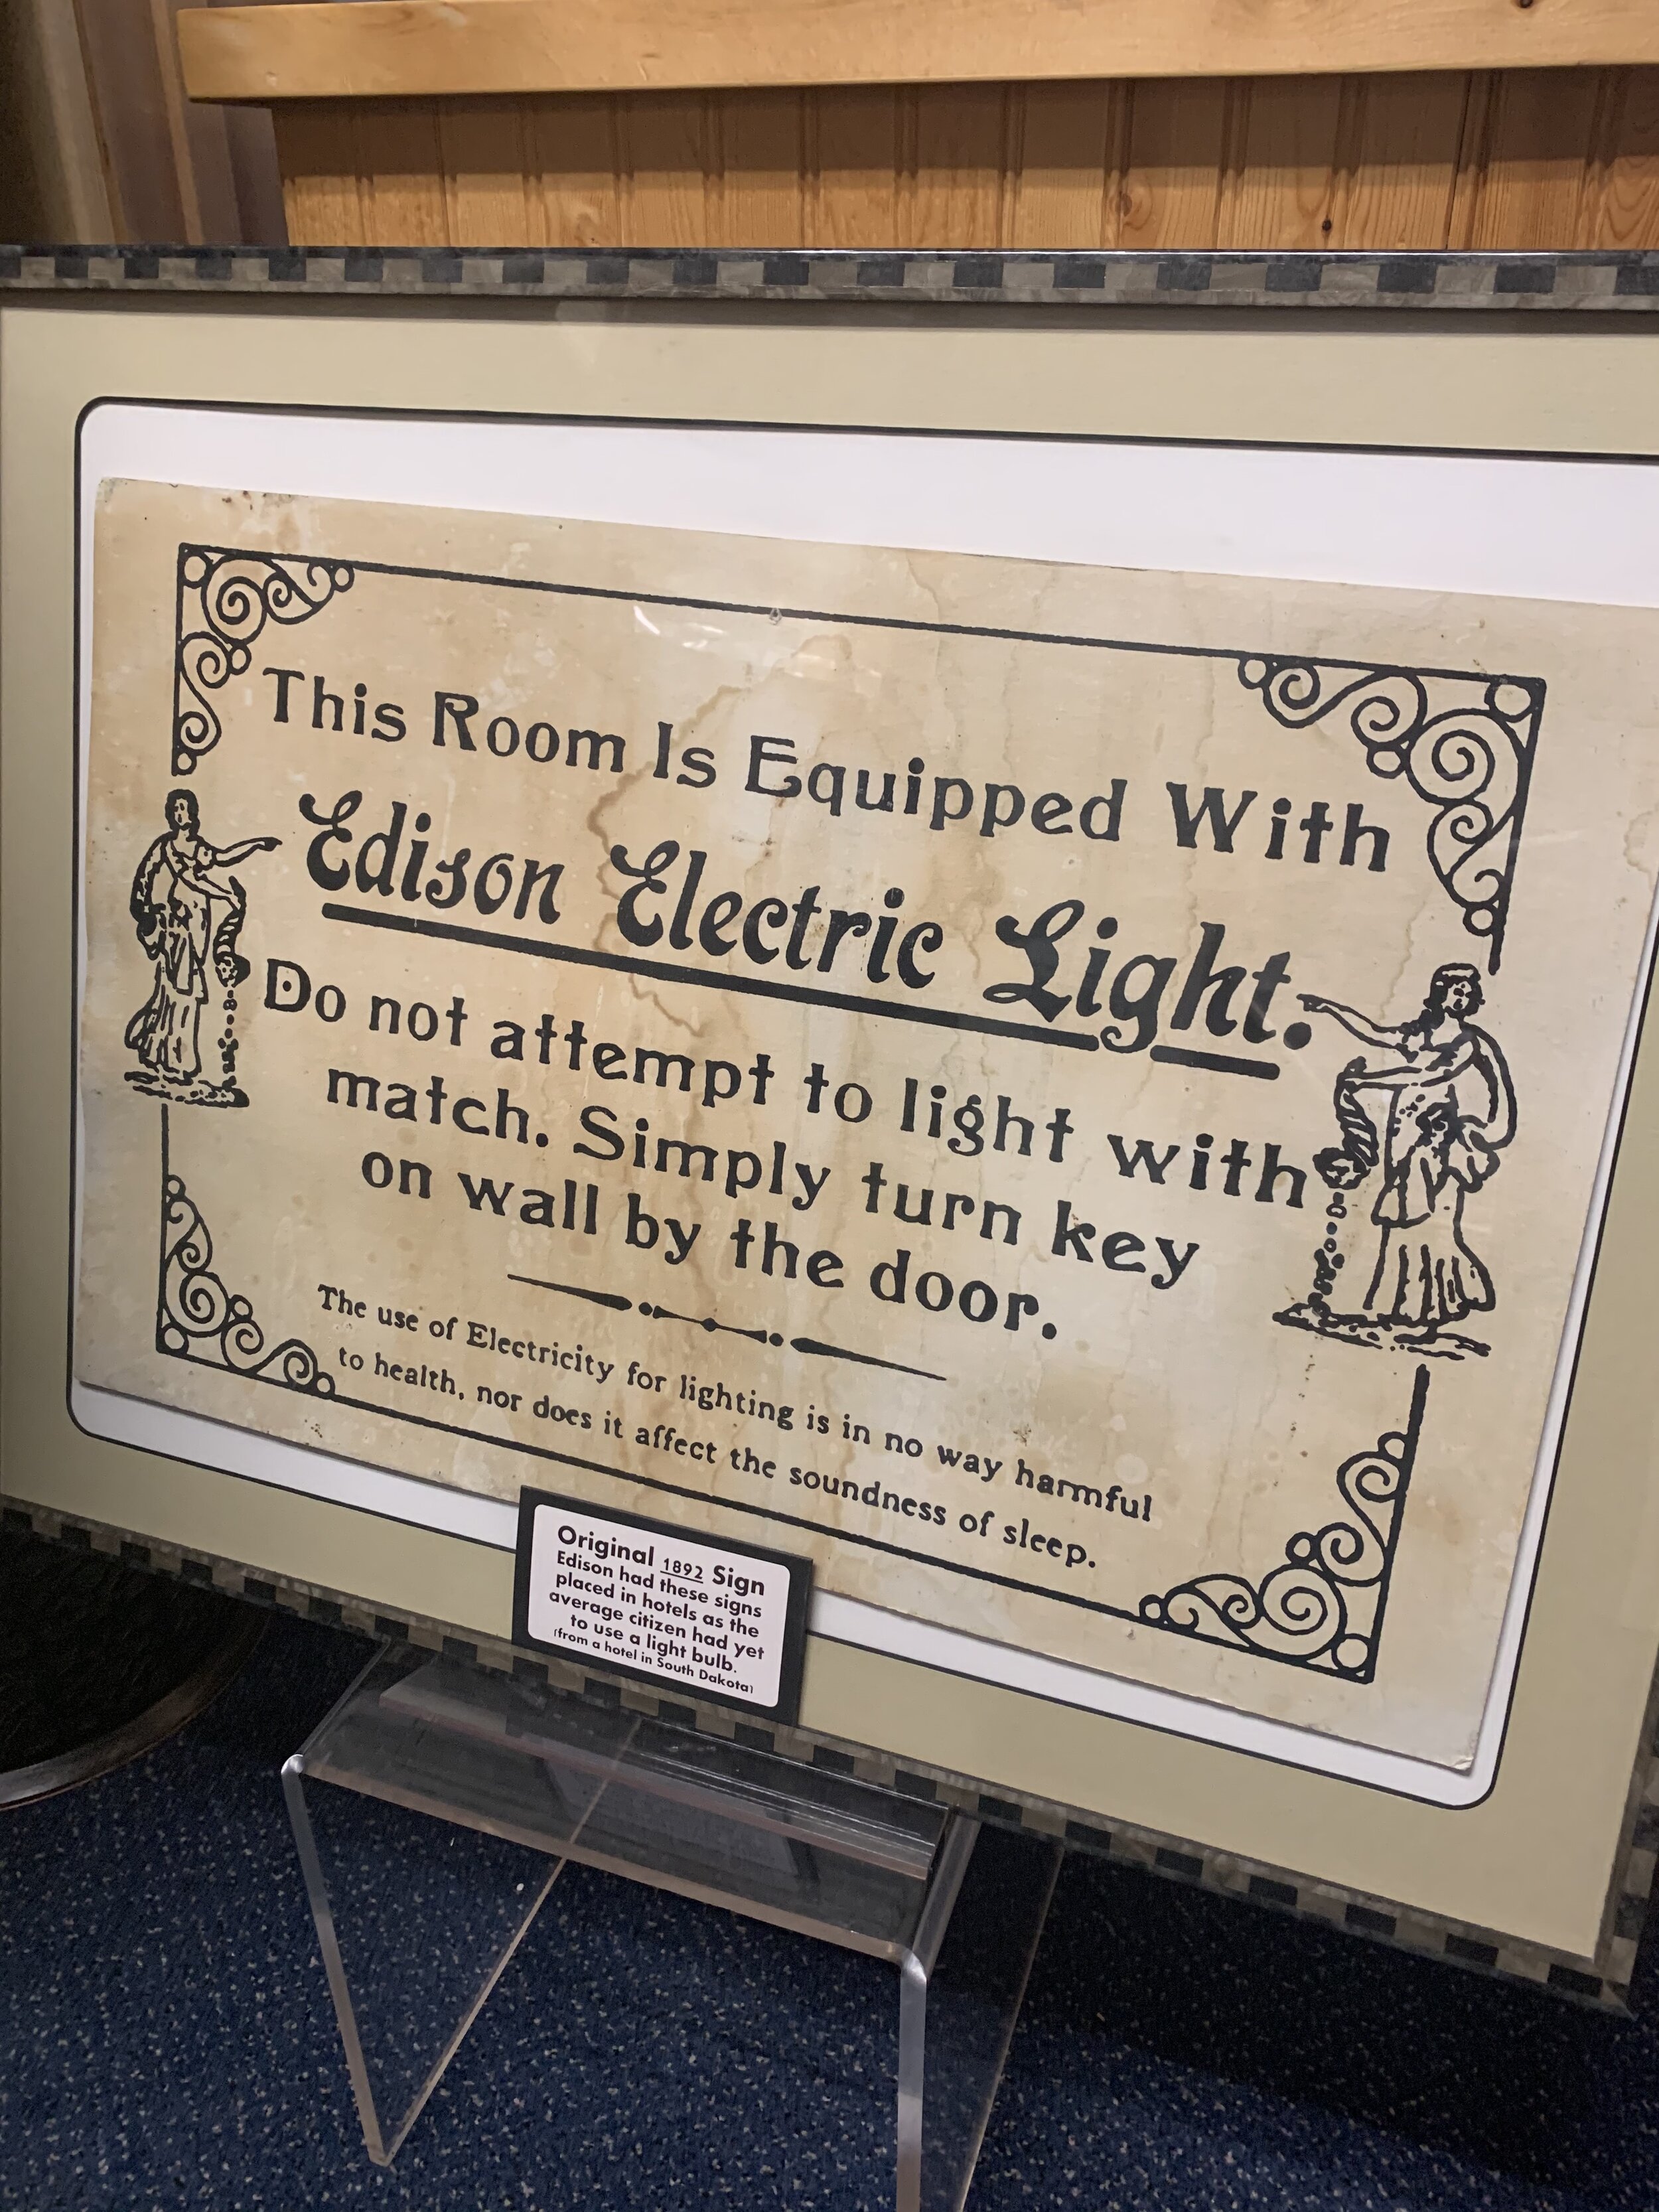  At the   American Computer &amp; Robotics Museum,   we learned many fascinating things. I especially found enjoyment in this original 1892 sign, posted in hotels for patrons to know how to use electric light bulbs, and instructing them not to “attem